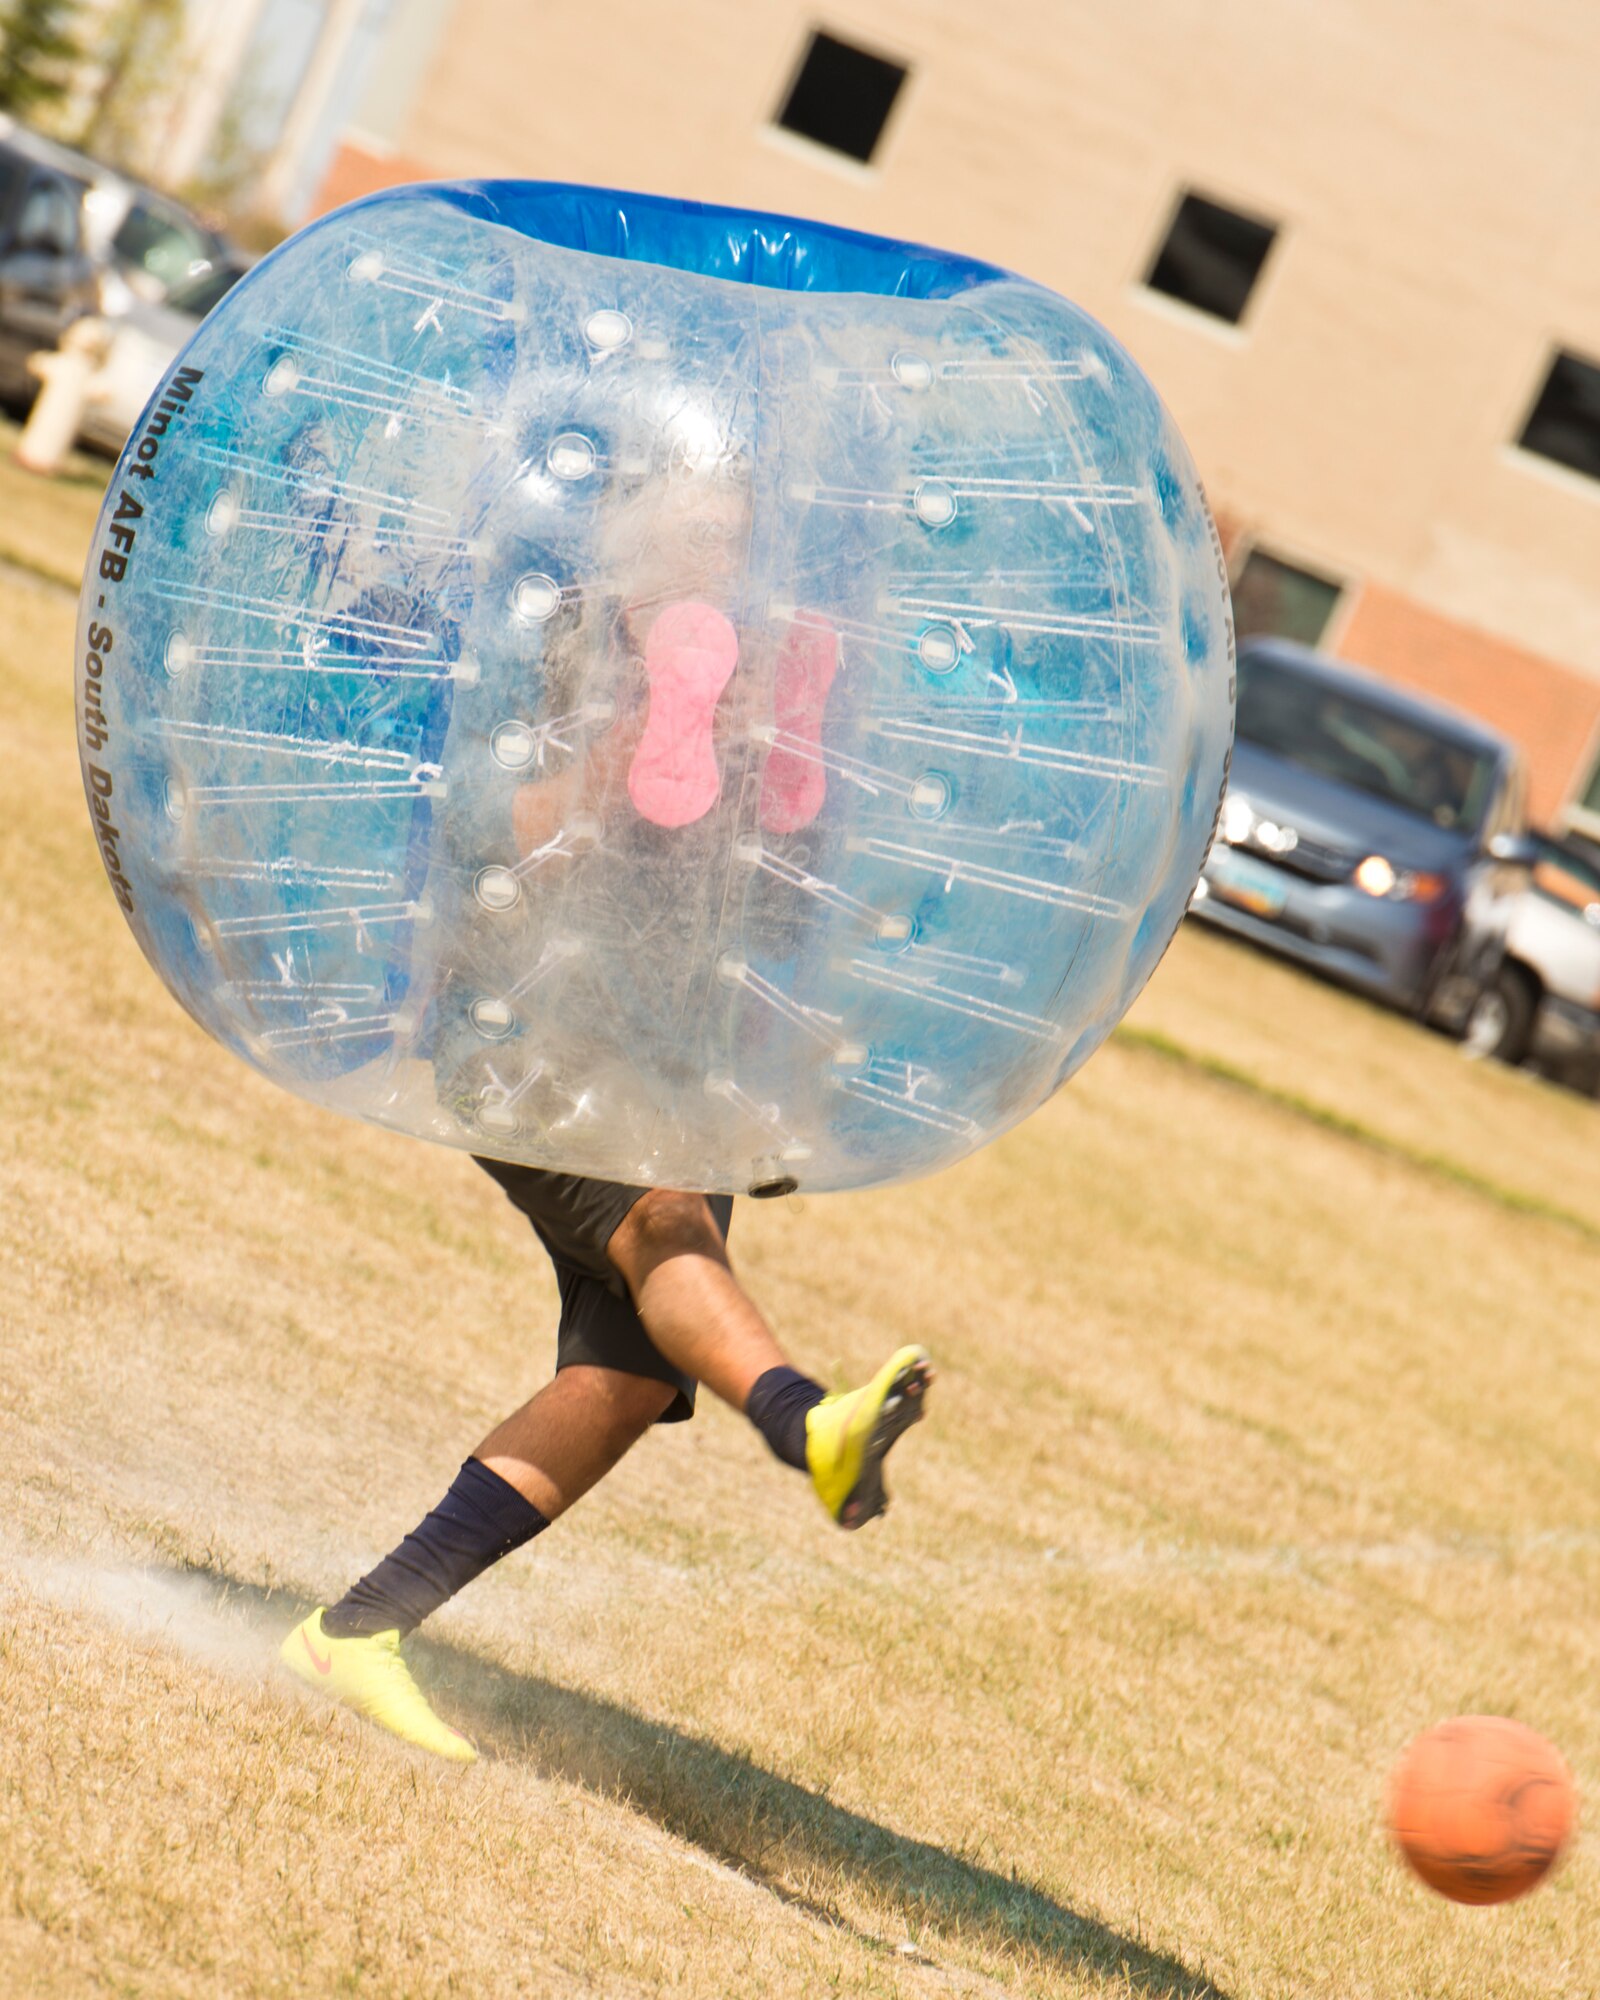 A Team Minot Airman kicks a soccer ball while playing knockerball during the Summer Games at Minot Air Force Base, N.D., Aug. 30, 2016. In knockerball, a variation of soccer, participants wear large inflatable bubbles around their upper body that allows them to bounce off other players, and makes falling down a bit more fun. (U.S. Air Force photo/Airman 1st Class J.T. Armstrong)